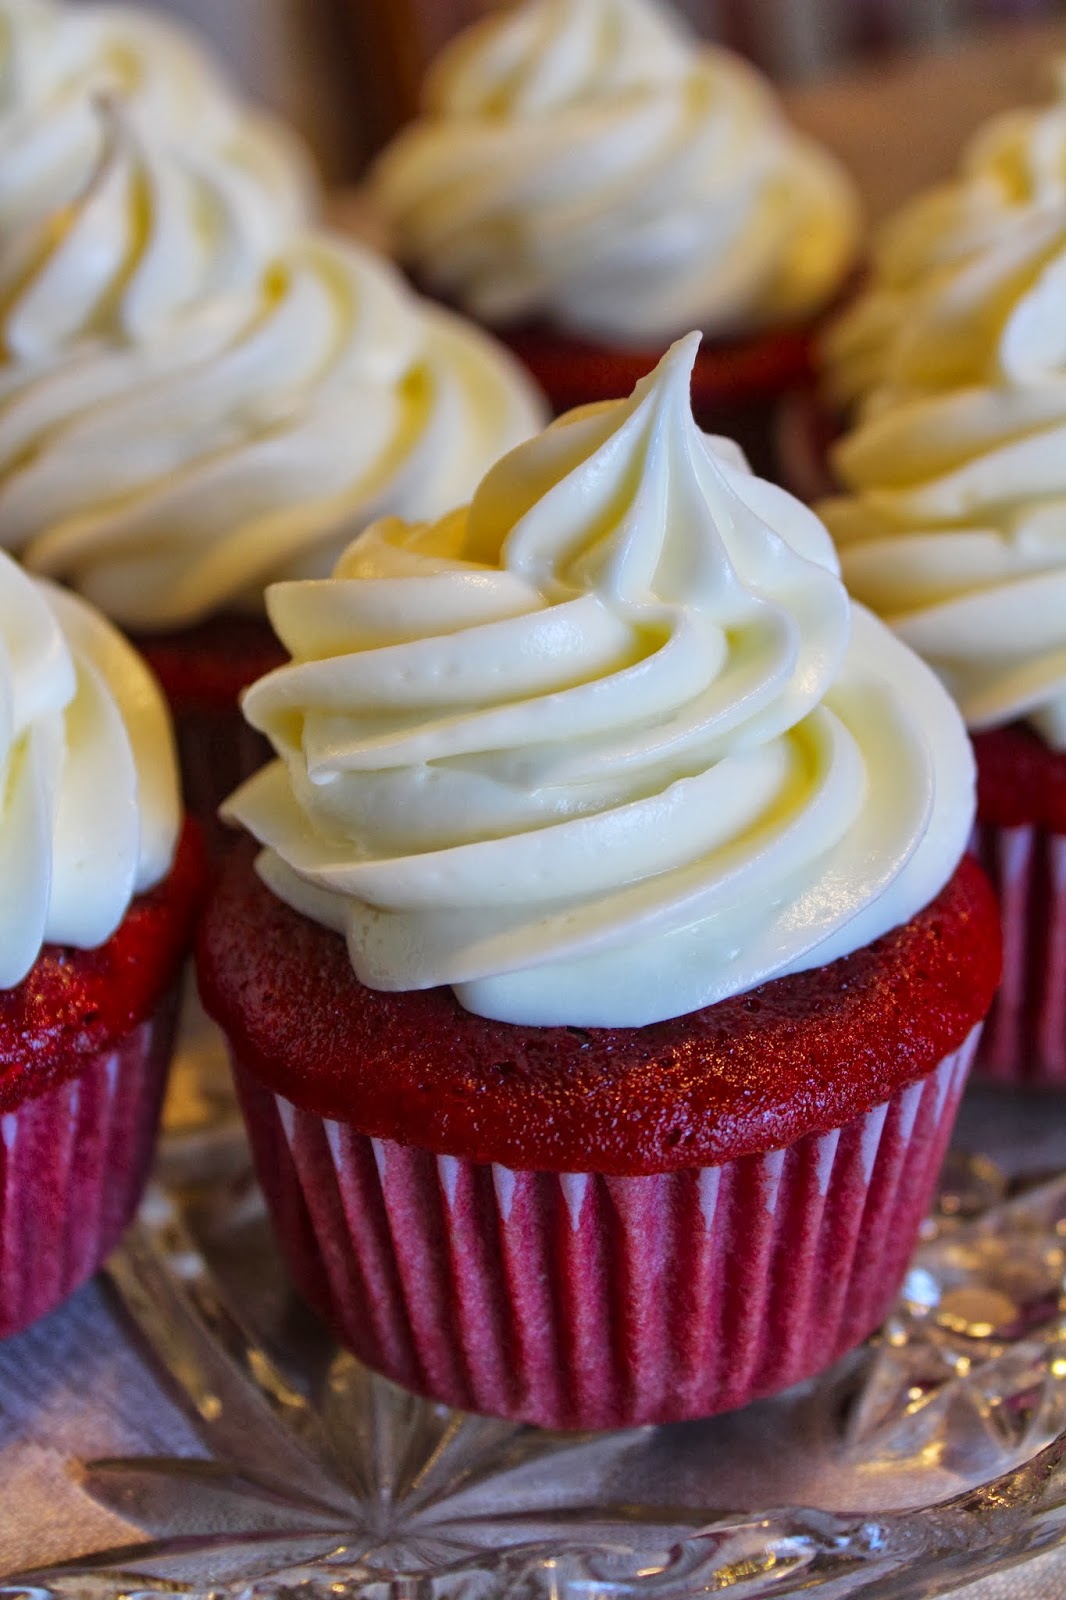 Red Velvet Cupcakes with Cream Cheese Filling